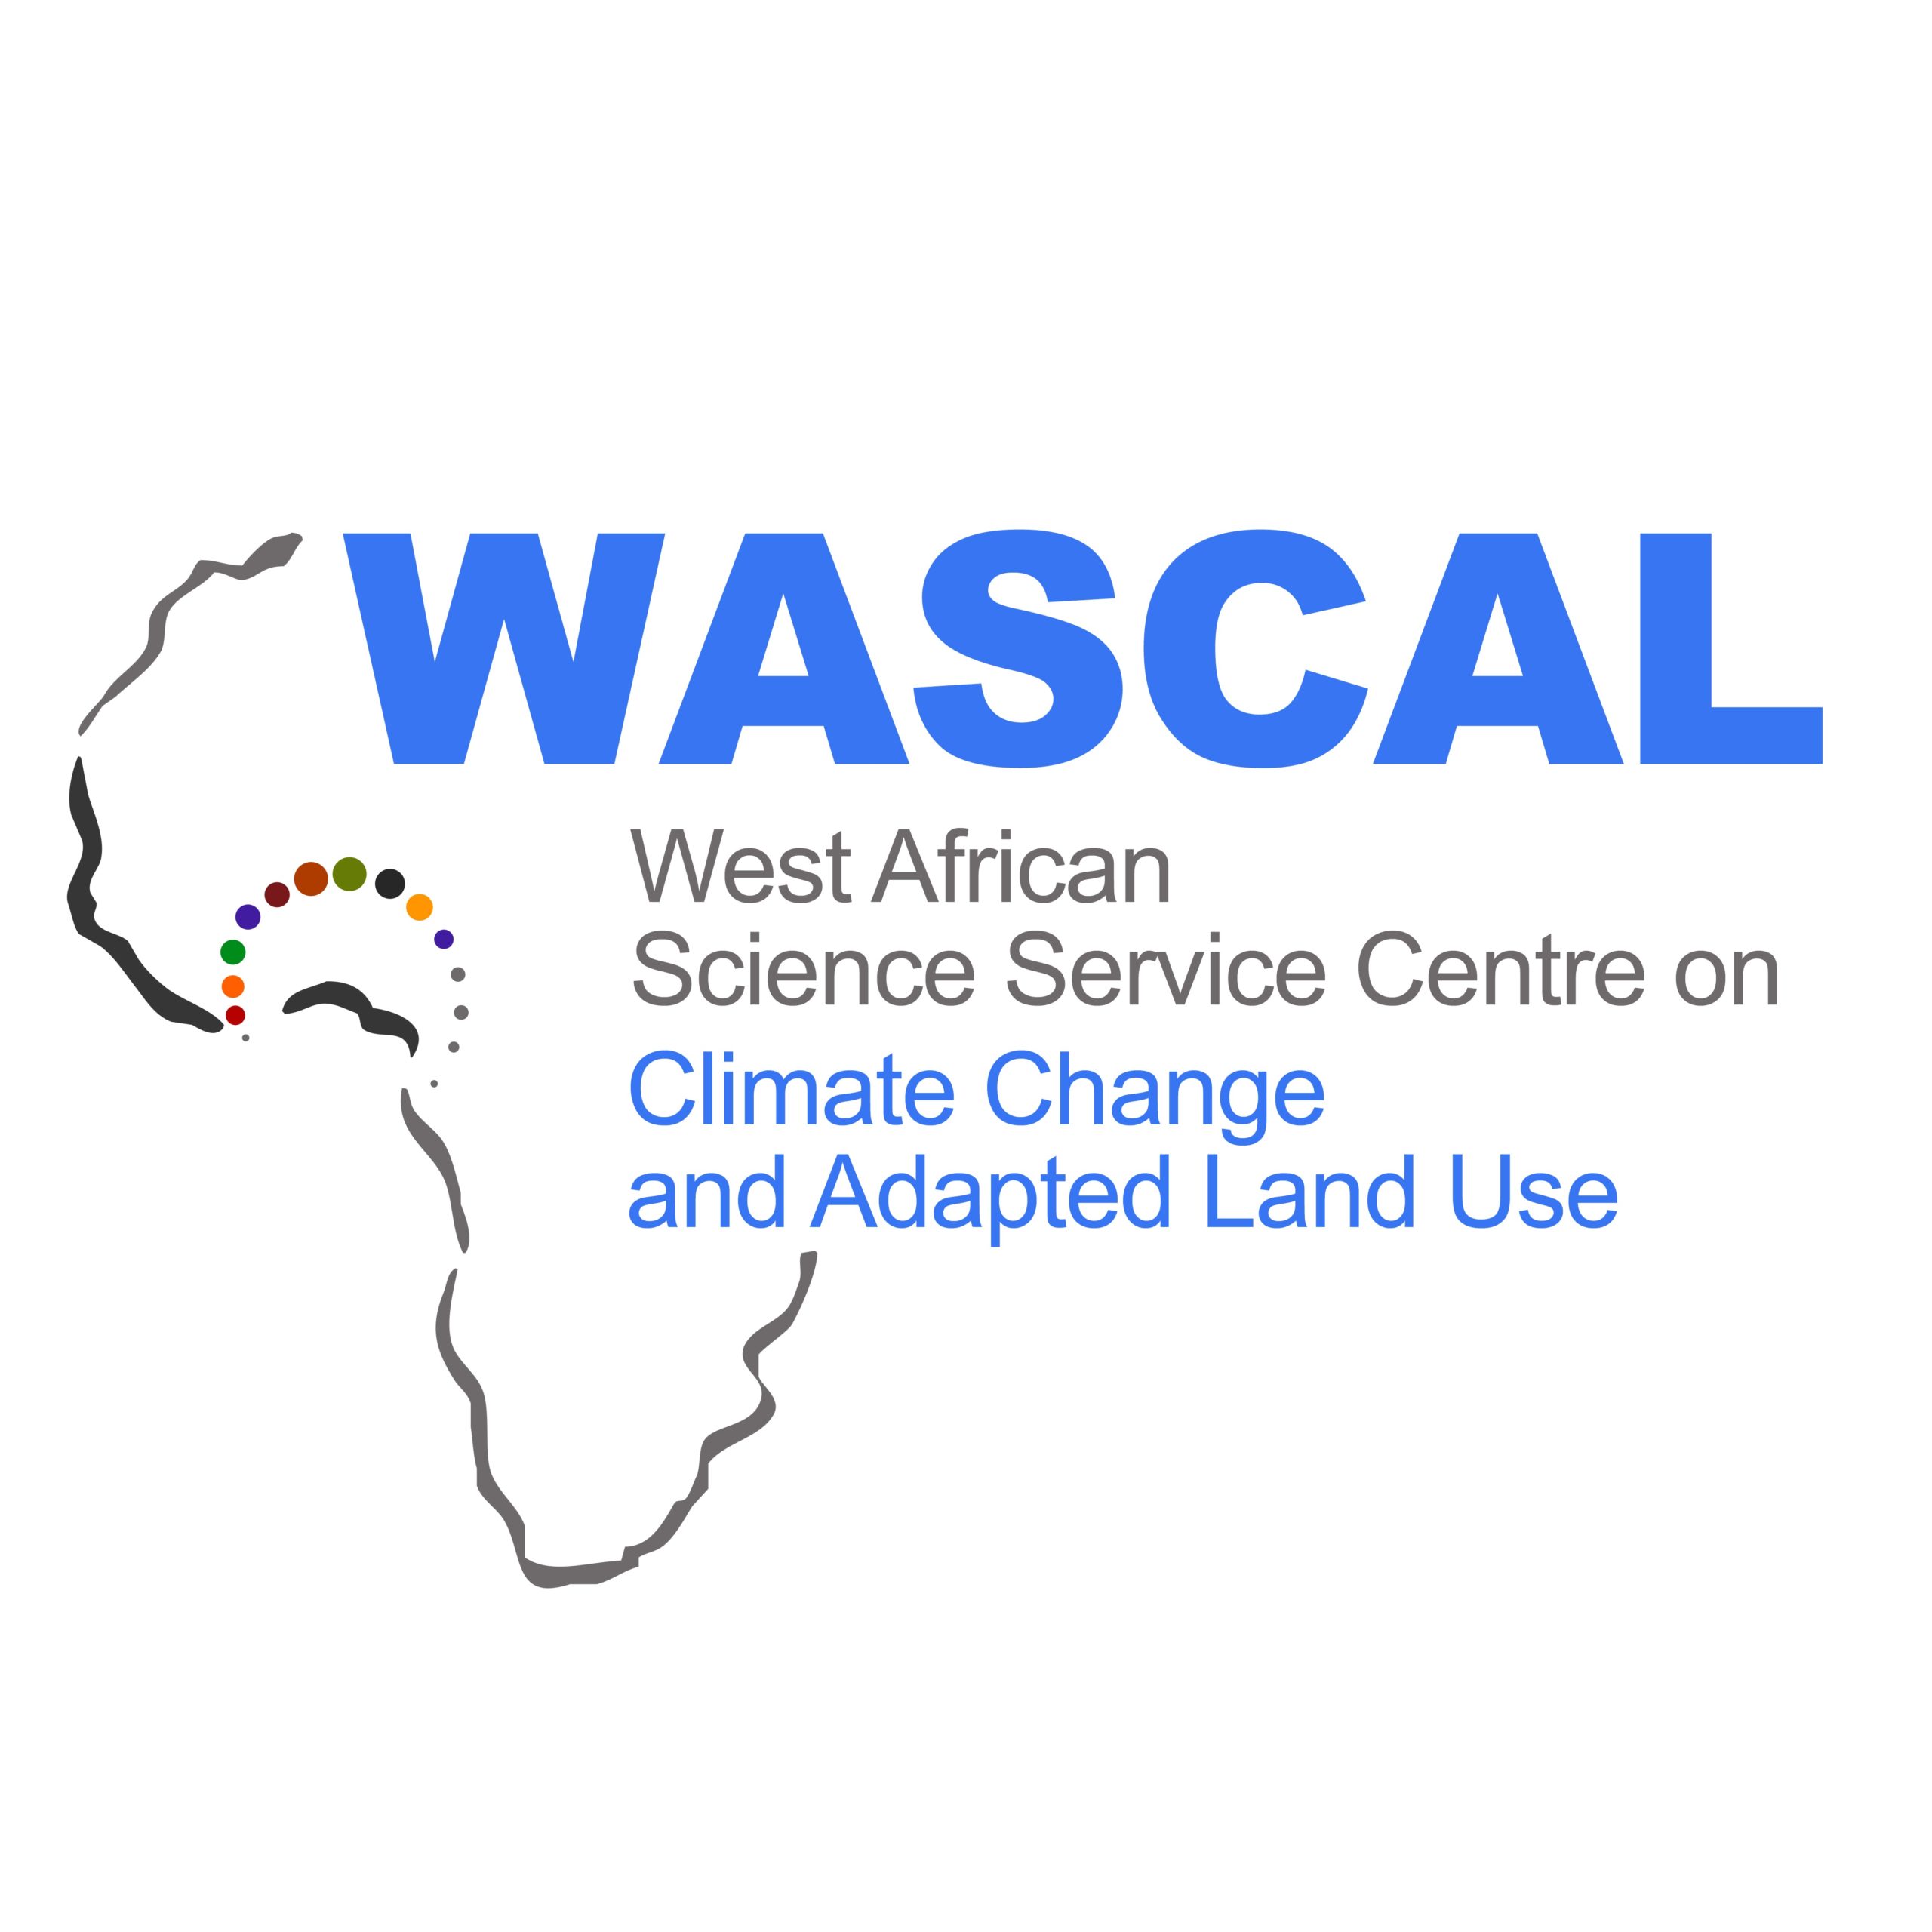 West African Science Service Centre on Climate Change and Adpated Land Use